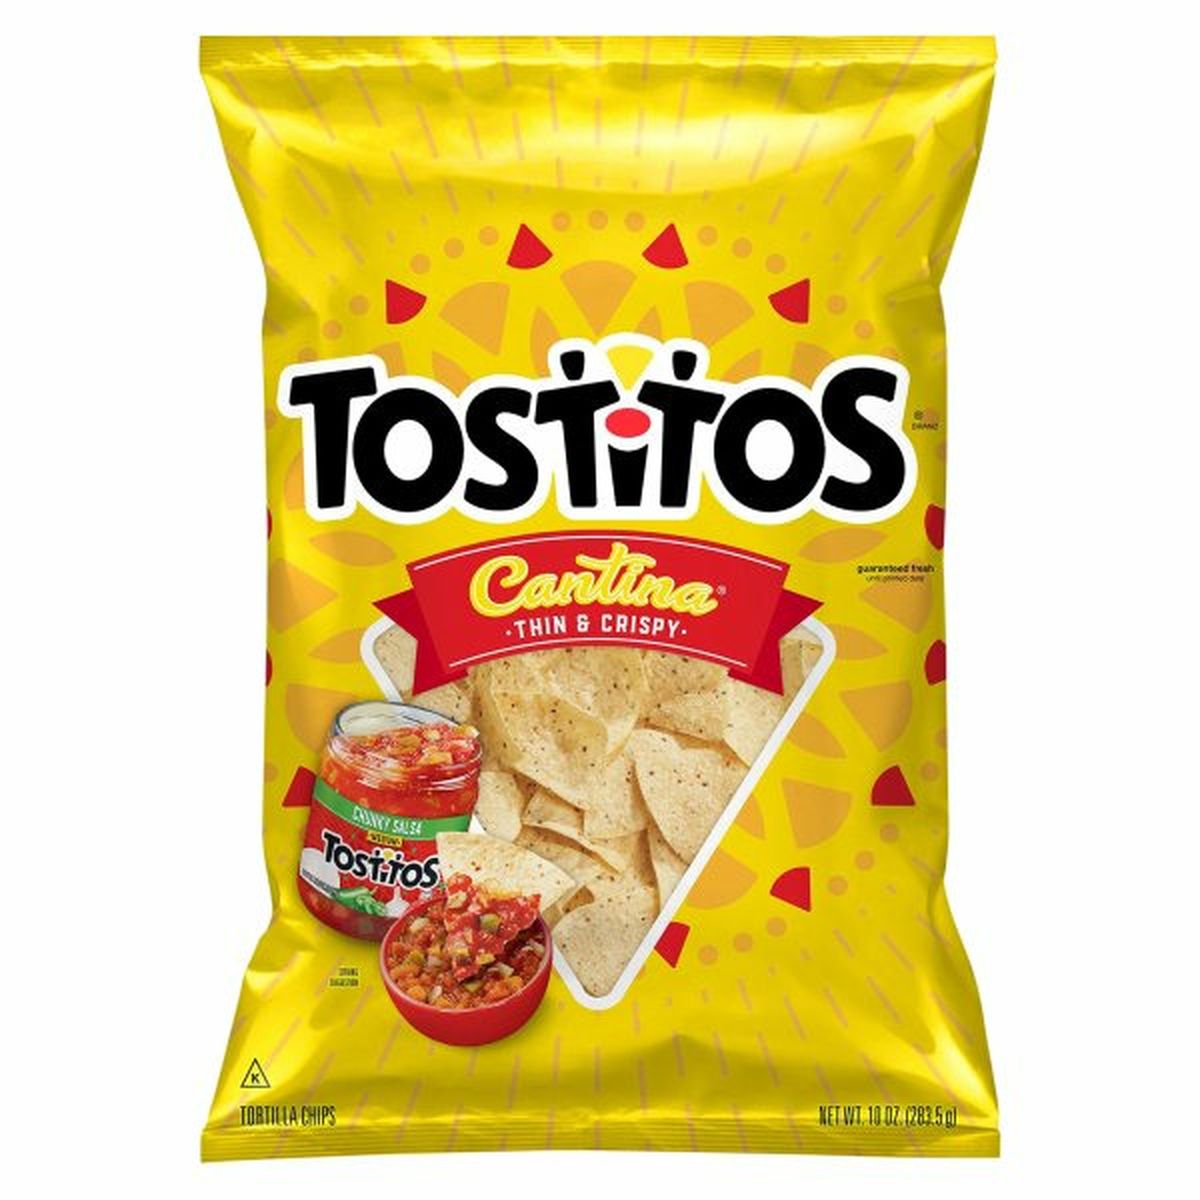 Calories in Tostitos Tortilla Chips, Cantina, Thin & Crispy